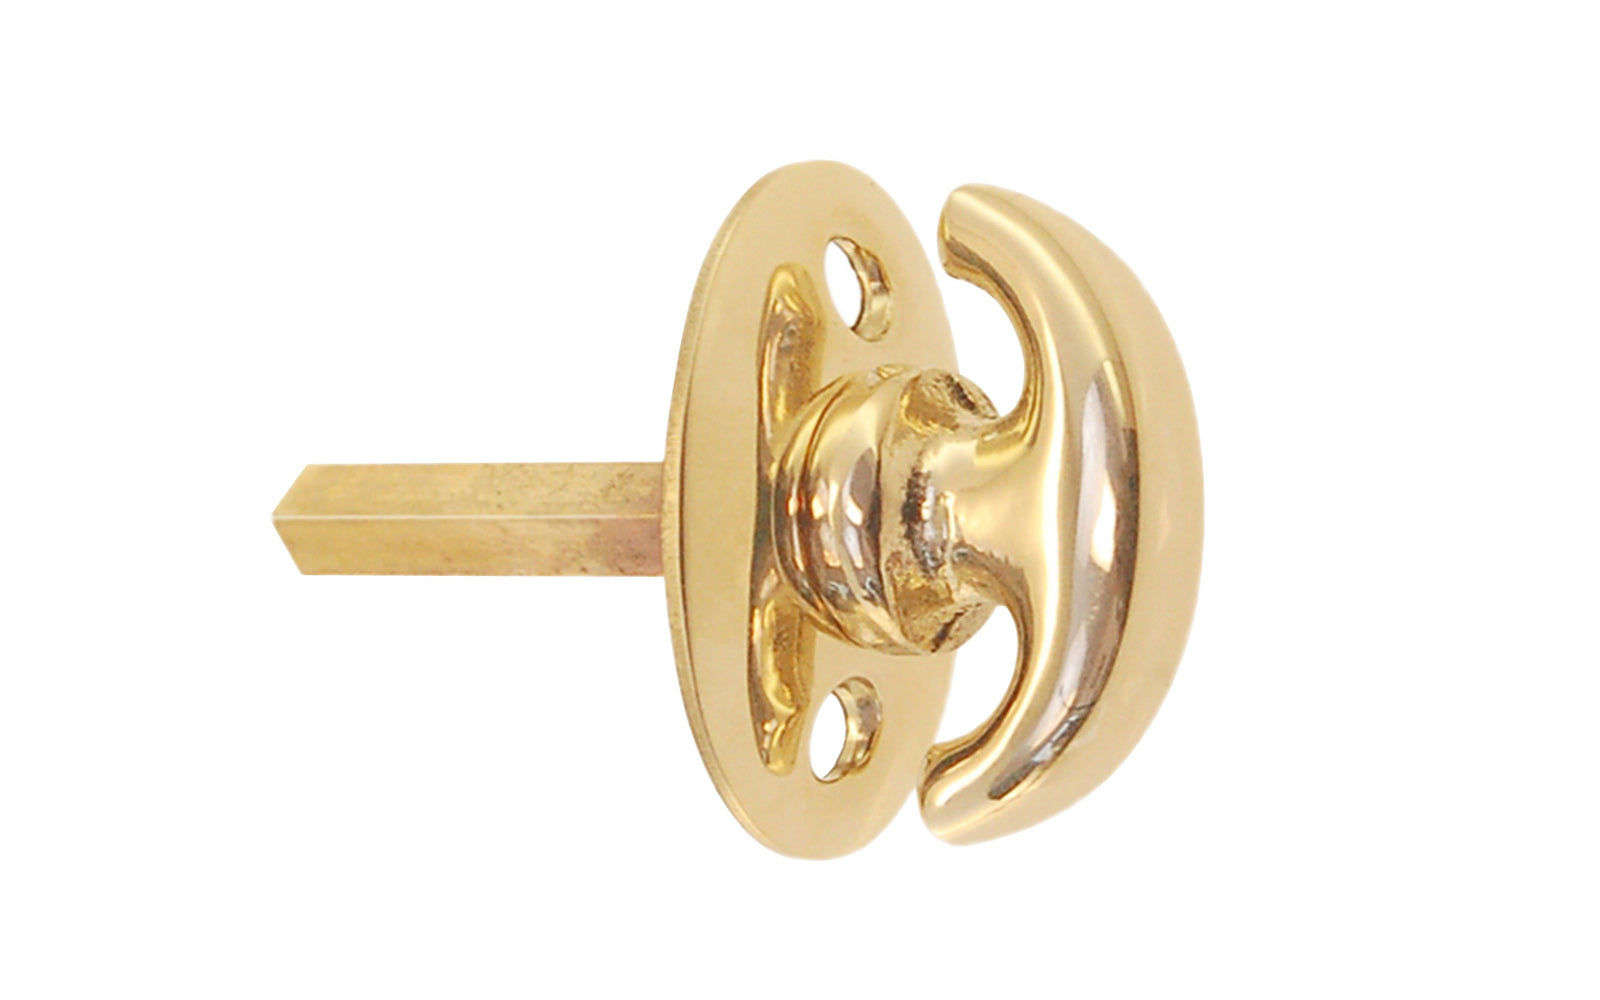 An old-style Classic Solid Brass crescent thumbturn for locking doors with a smaller oval plate. Used with mortise locks, deadbolts, night-locks, catches. Made of solid brass material. 3/16" thick shaft. Unlacquered brass (will patina naturally)